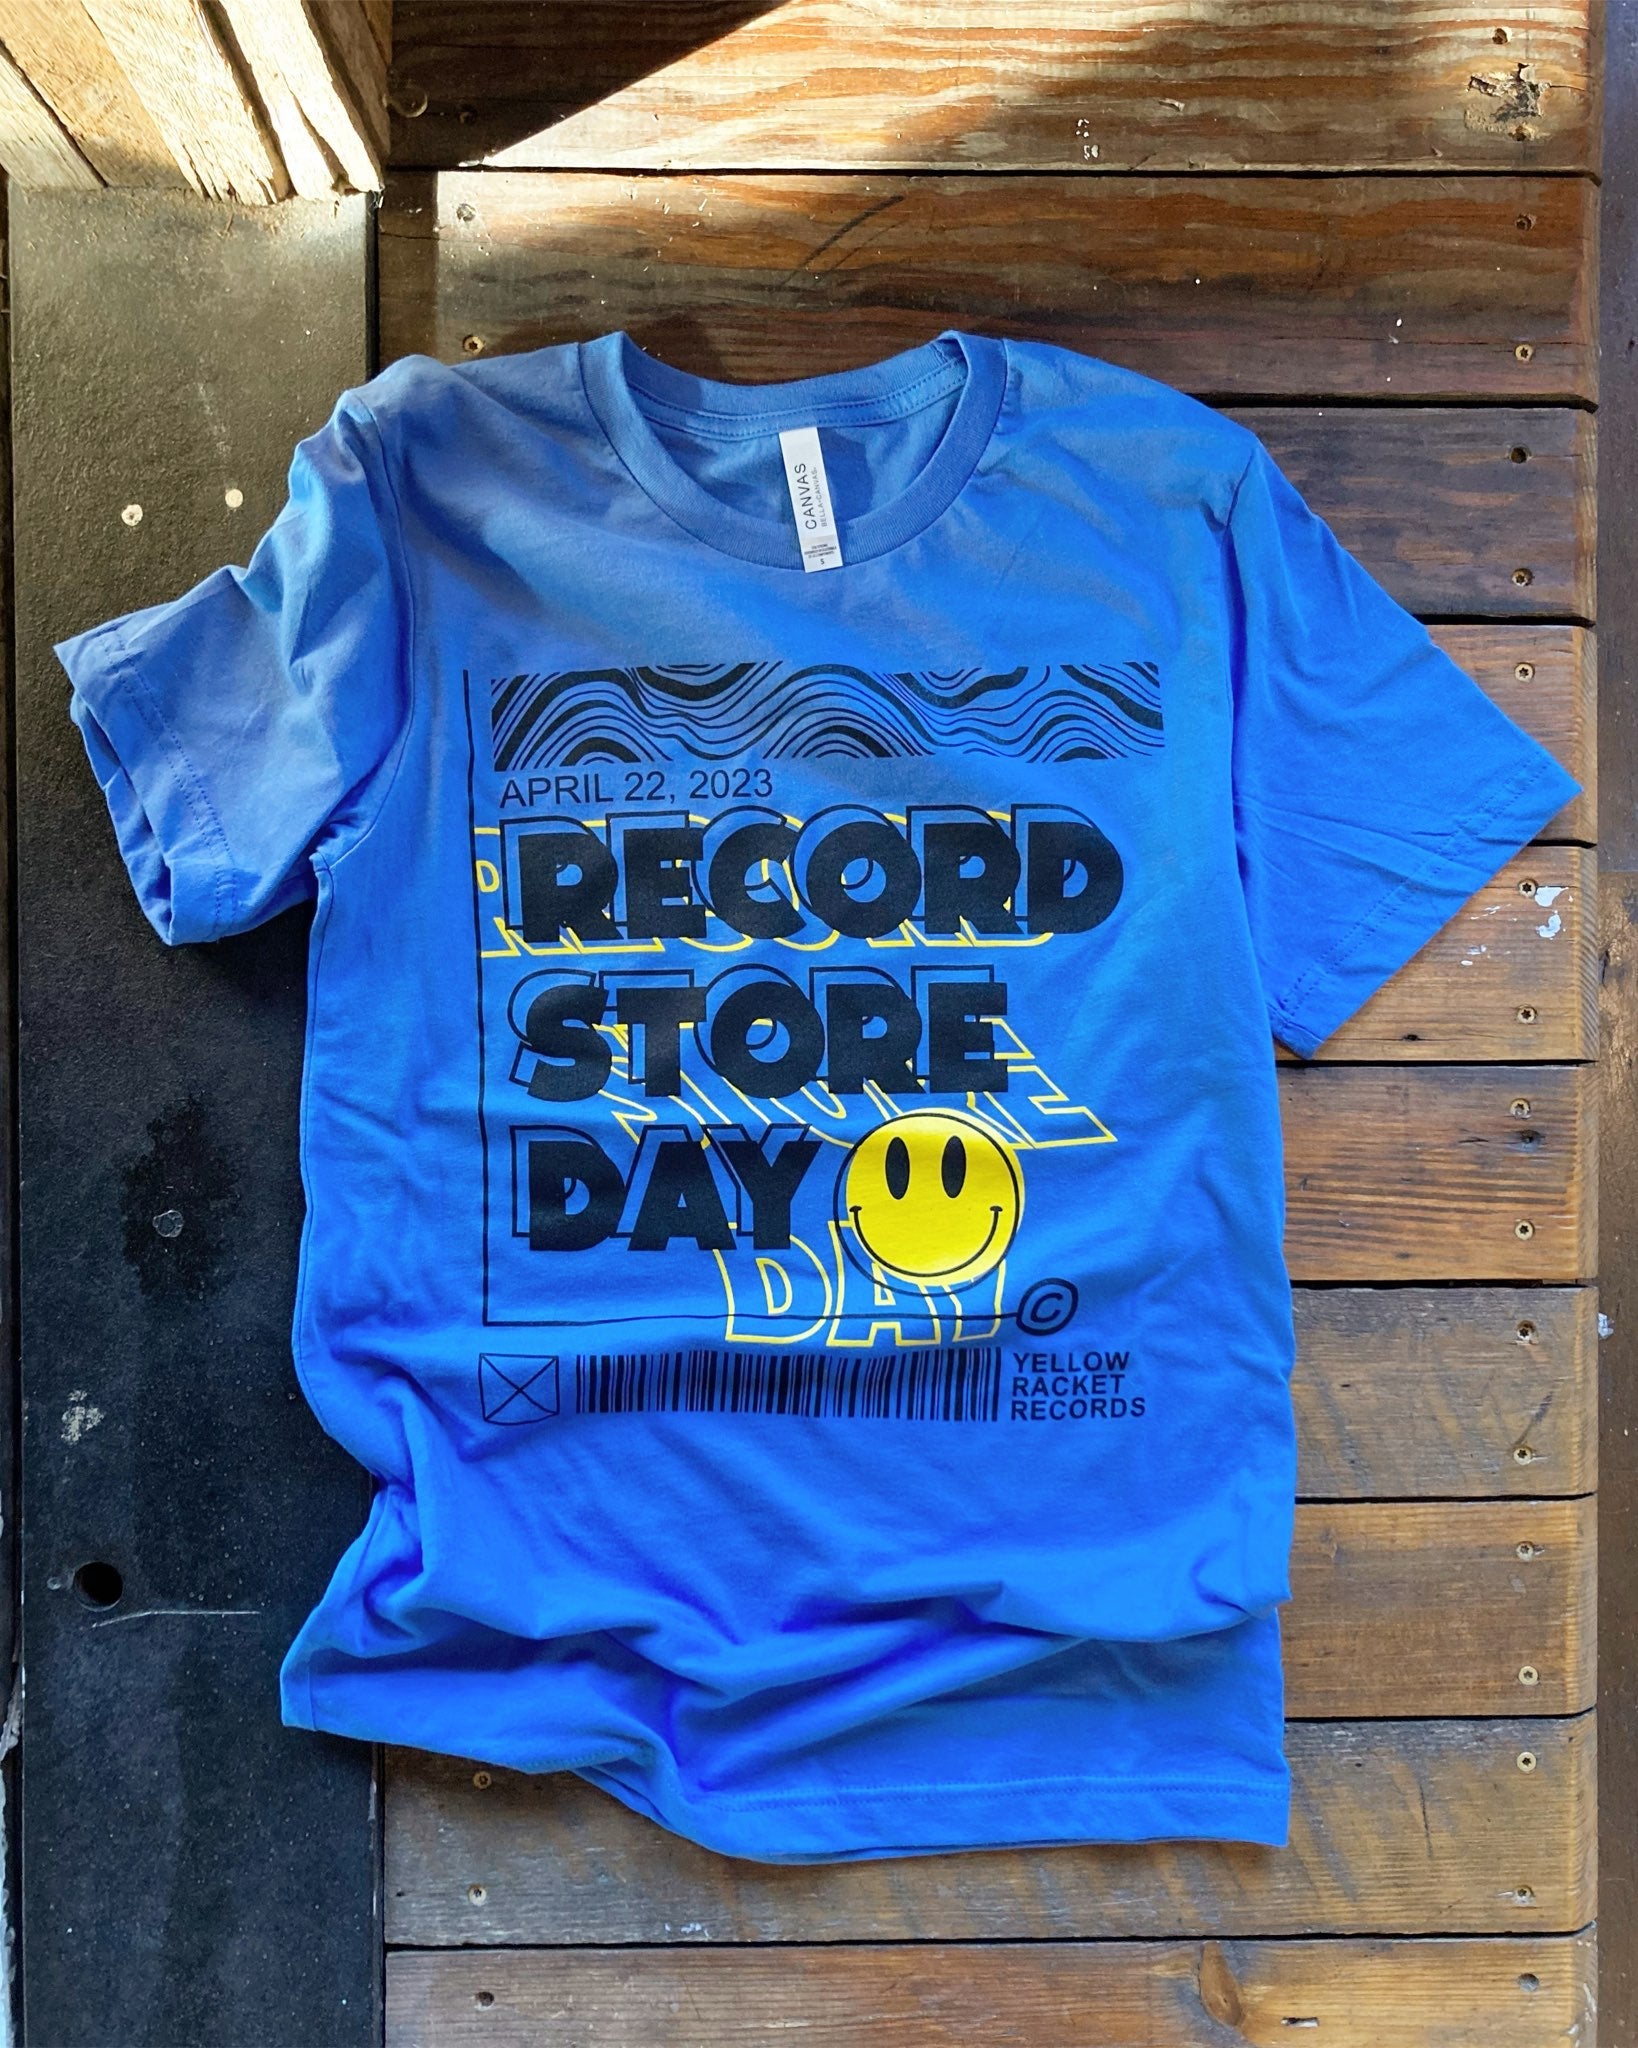 Smiley Face T-Shirt (Blue/Black/Yellow) - Record Store Day 2023 - Smiley Face T-Shirt (Blue/Black/Yellow) - Record Store Day 2023 - XL - Apparel - Yellow Racket Records